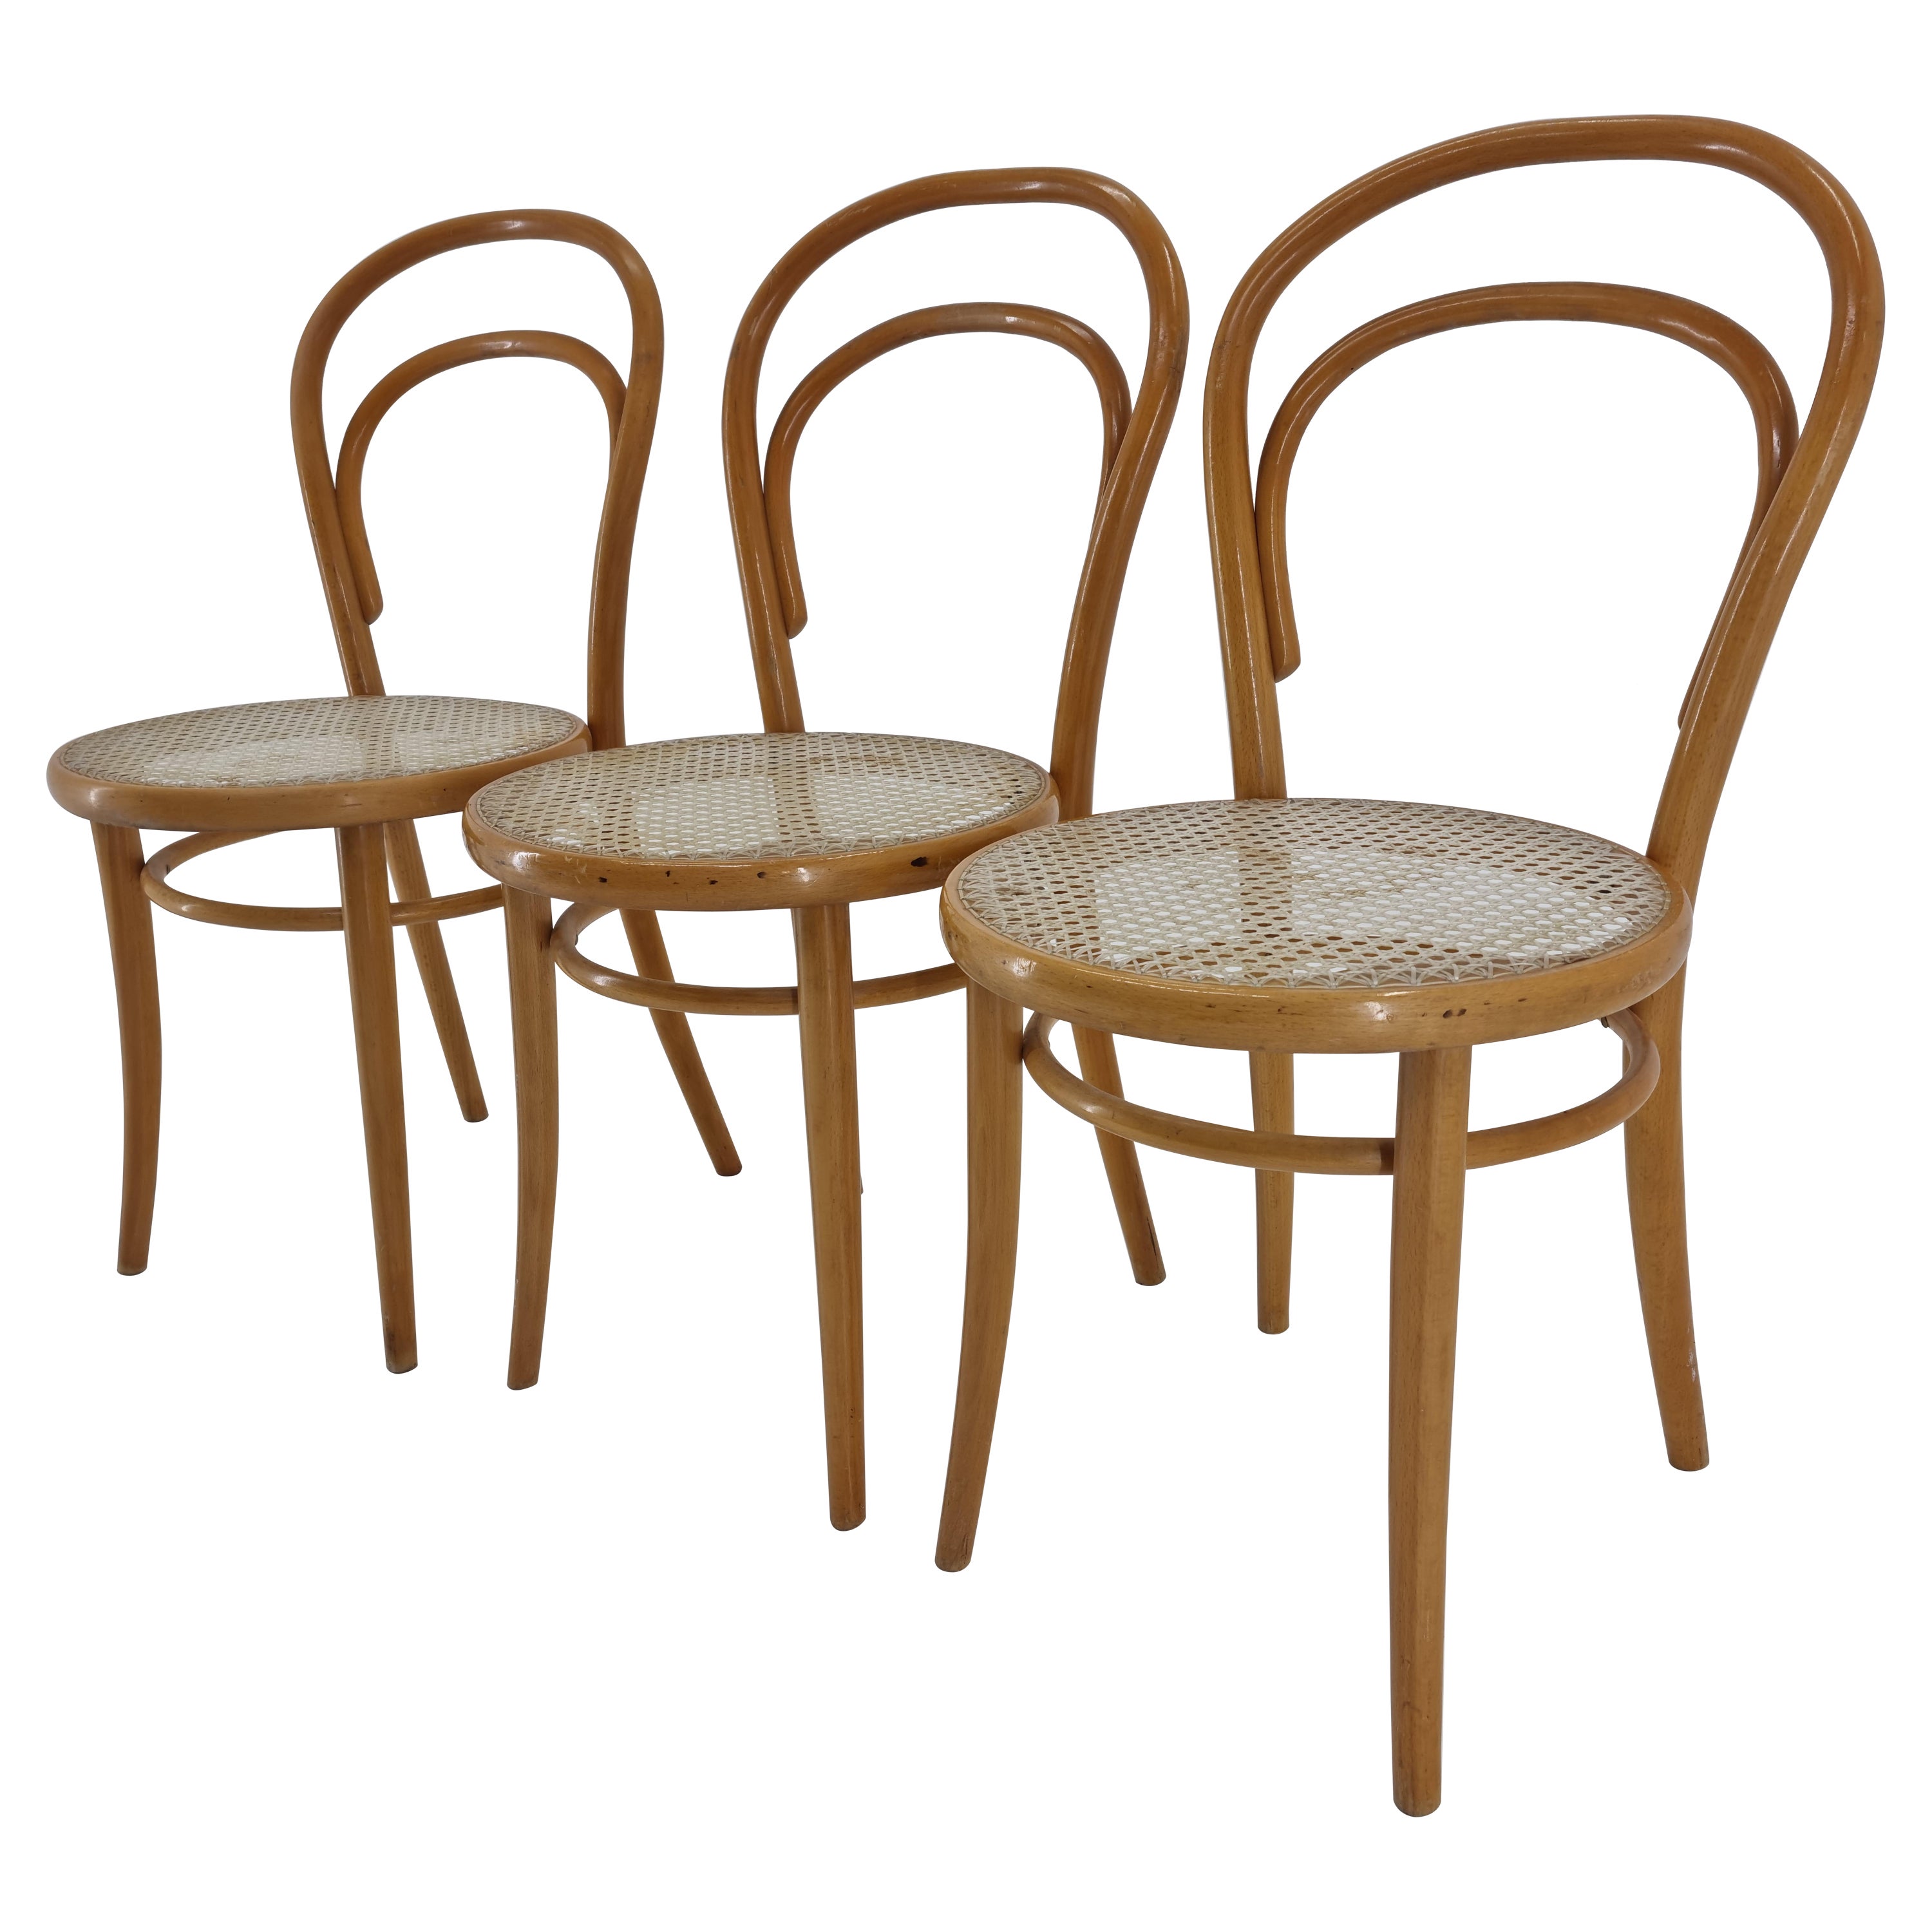 Set of Three Bentwood Chairs Nr. 14, Ton, Michael Thonet, 1950s